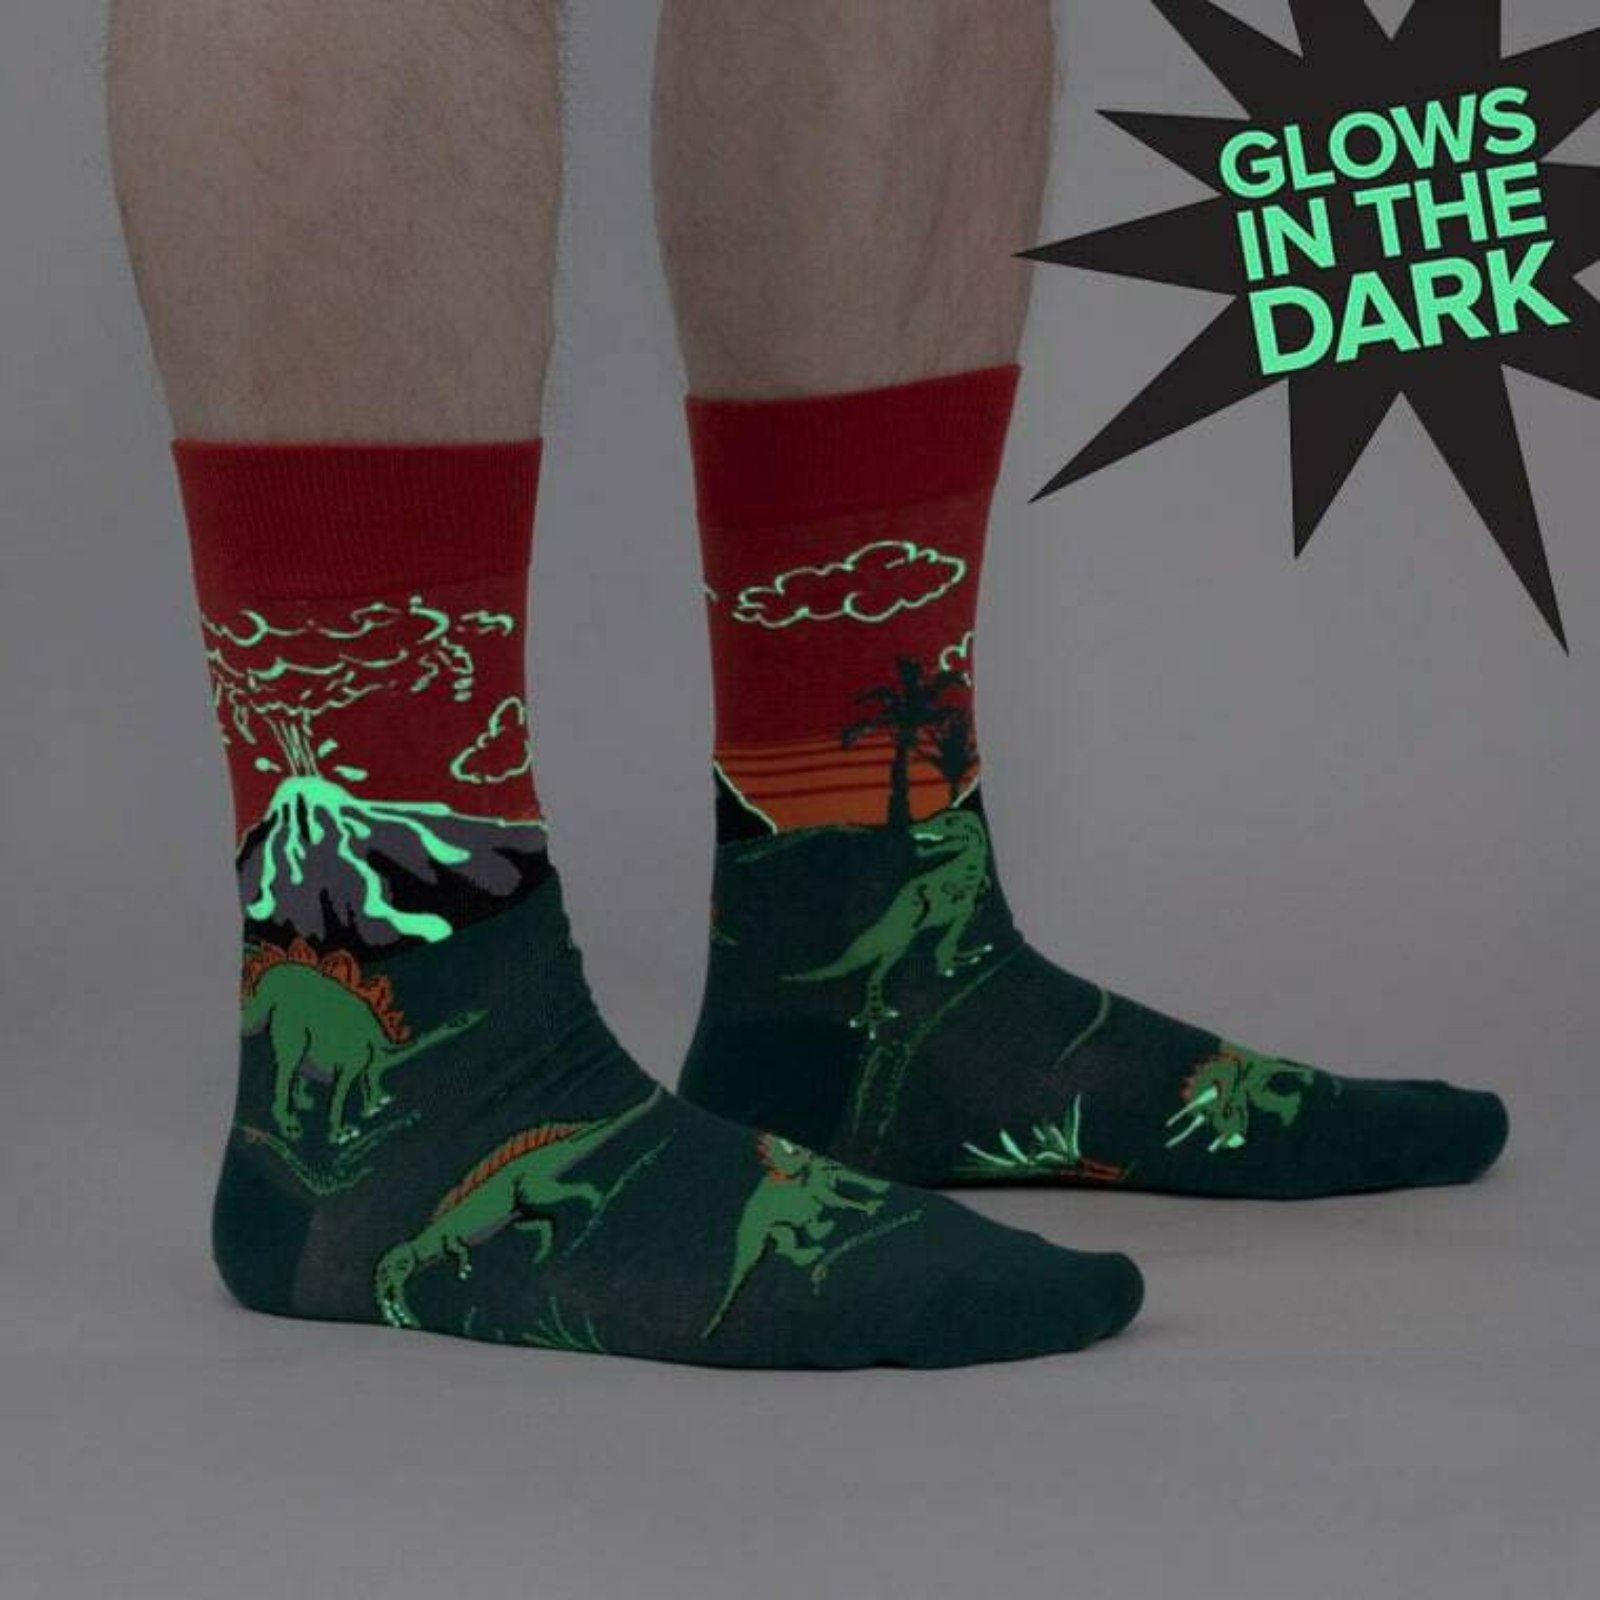 Sock It To Me Dinosaur Days men's crew socks featuring red and green socks with glow in the dark exploding volcanoes and dinosaurs. Socks shown on model from the side. 